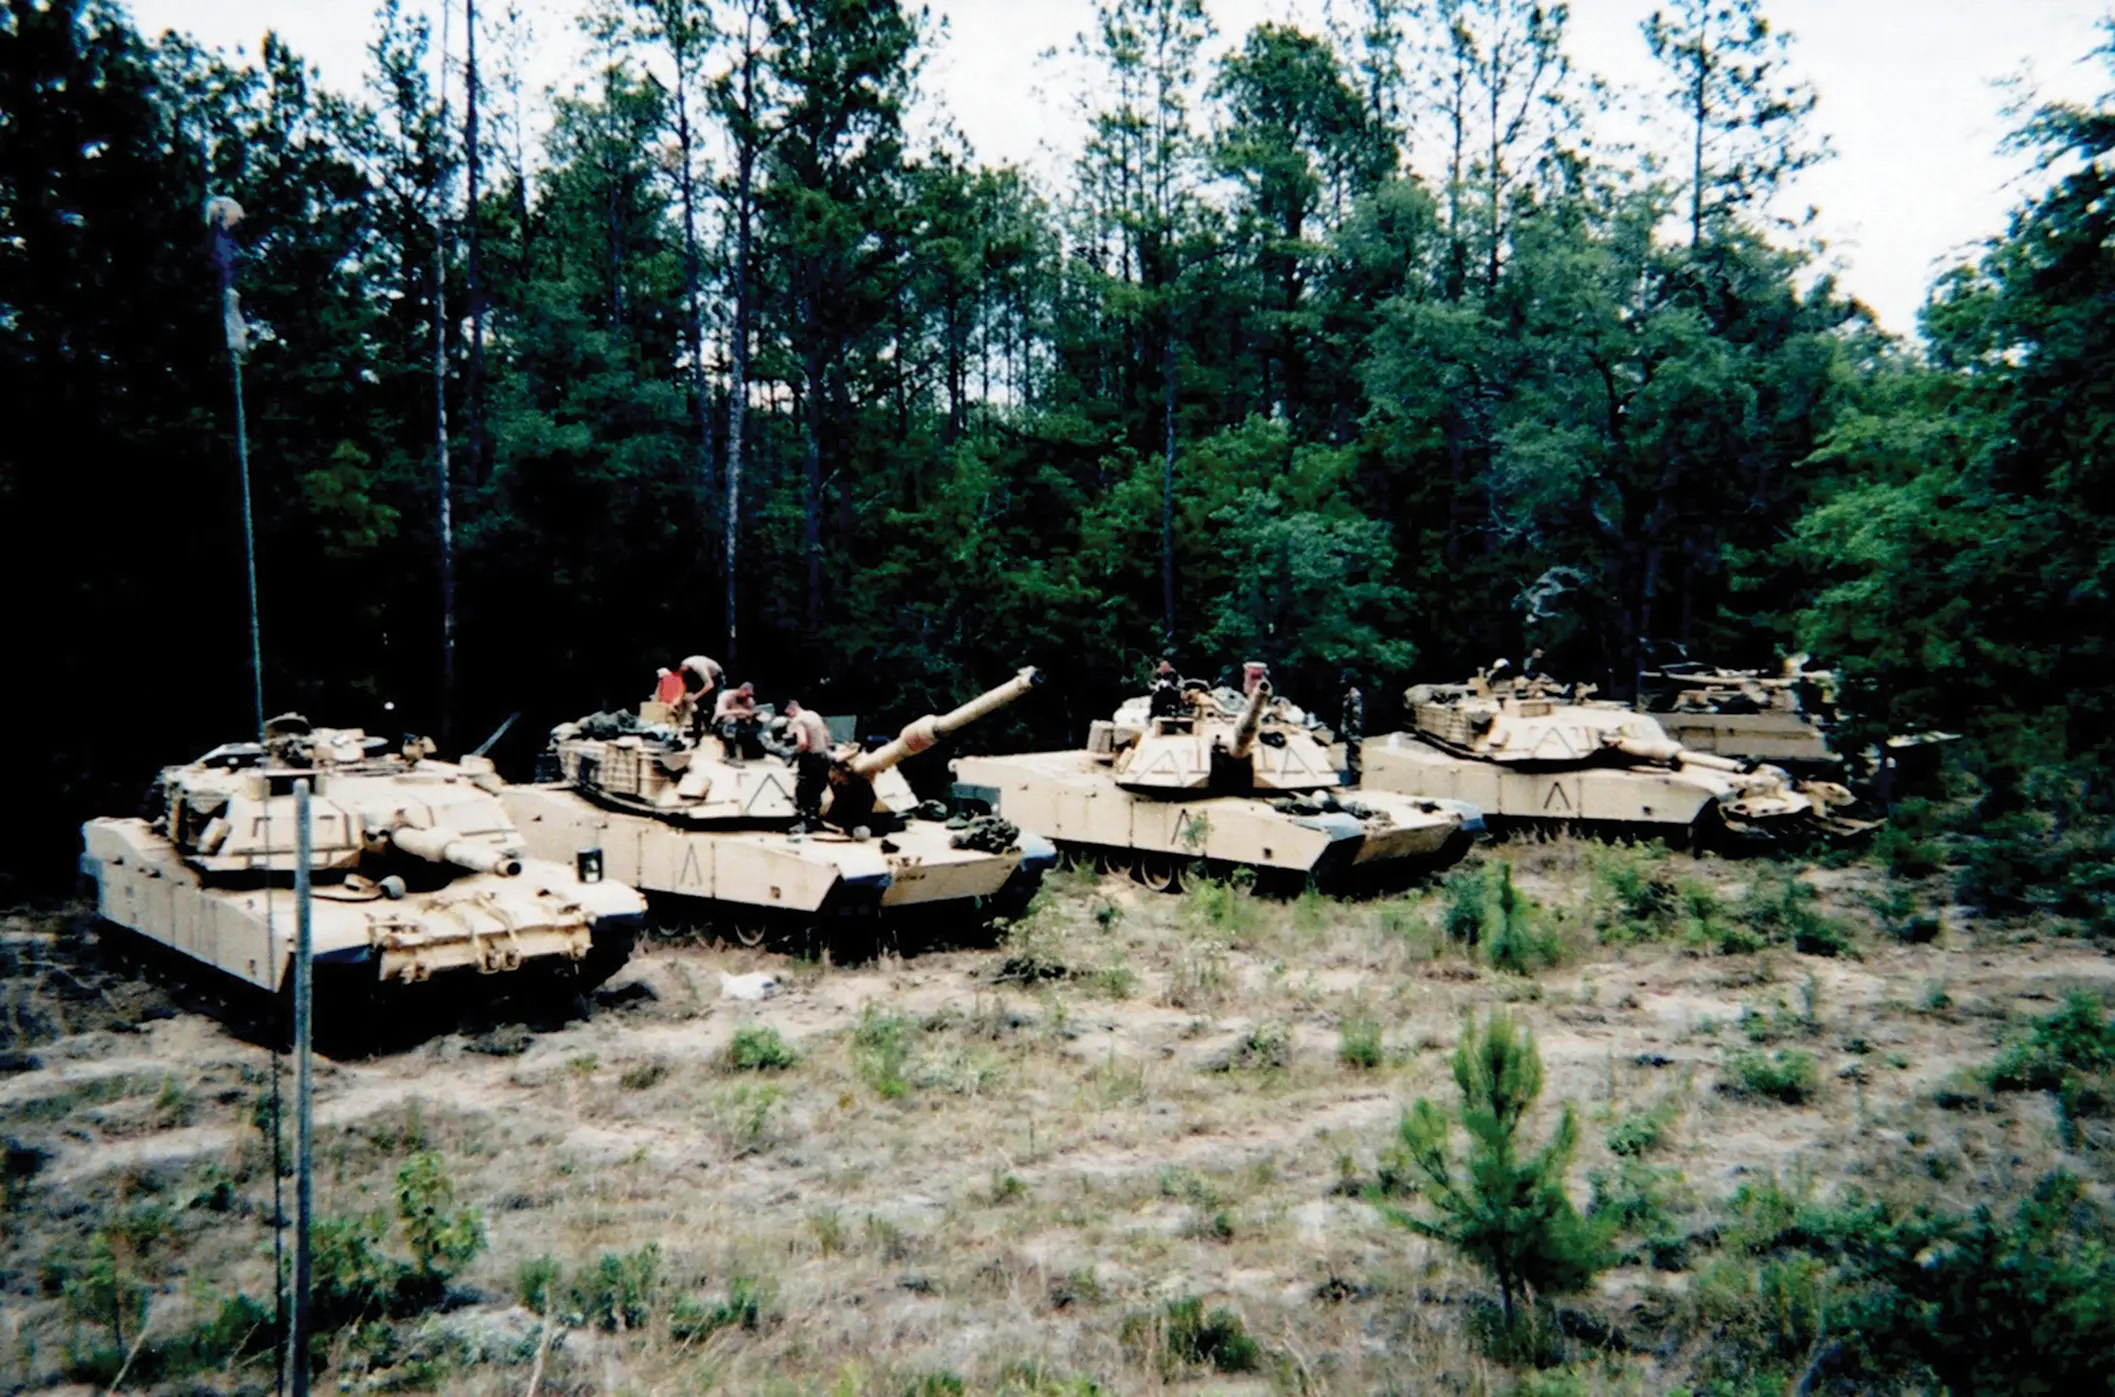 1st Battalion, 64th Armored Regiment at Red Cloud tank range